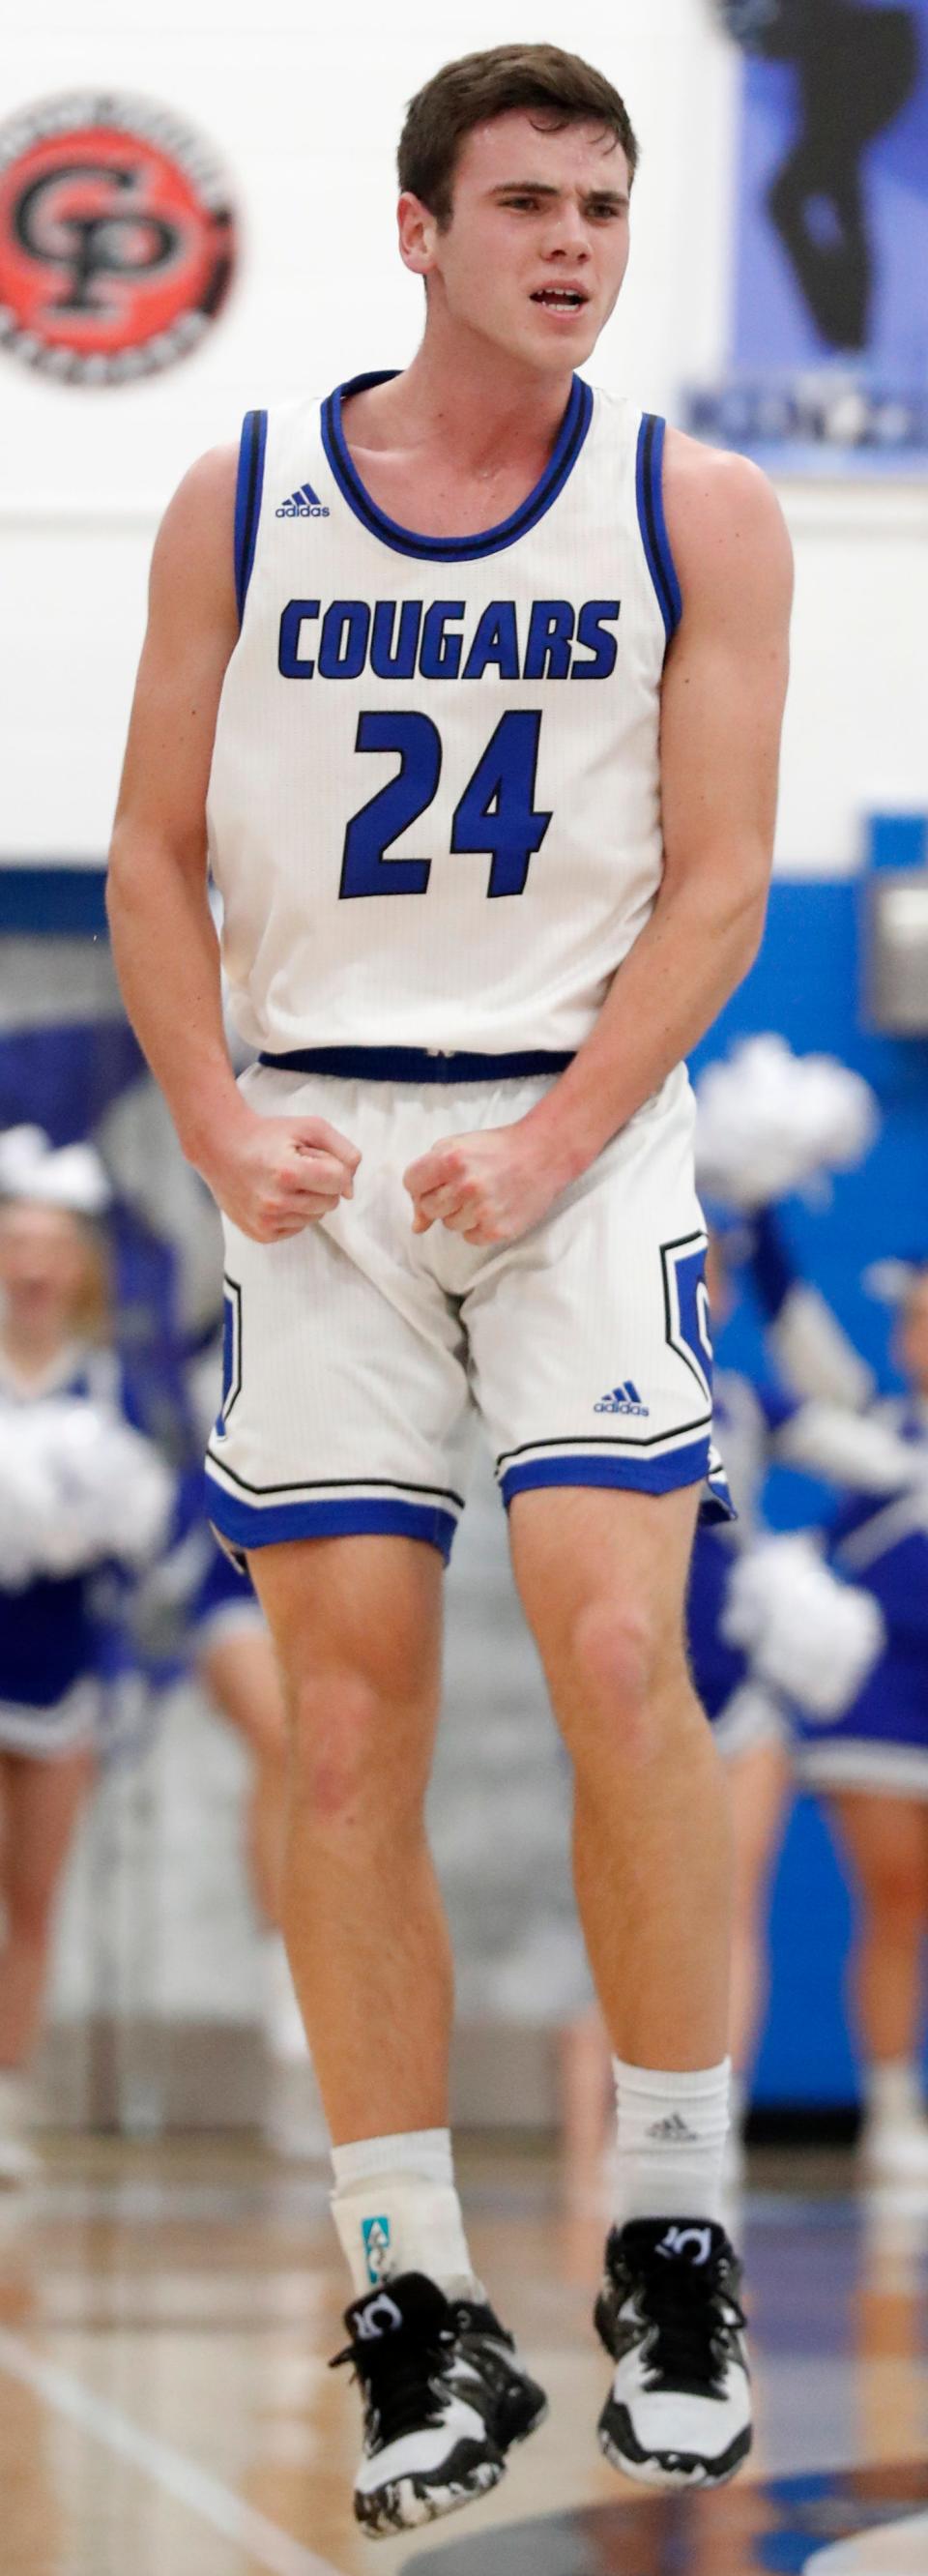 Carroll Cougars Jake Skinner (24) reacts to making a shot during the IHSAA boy’s basketball game against the Taylor Titans, Friday, Feb. 17, 2023, at Carroll High School in Flora, Ind. Carroll won 59-54.